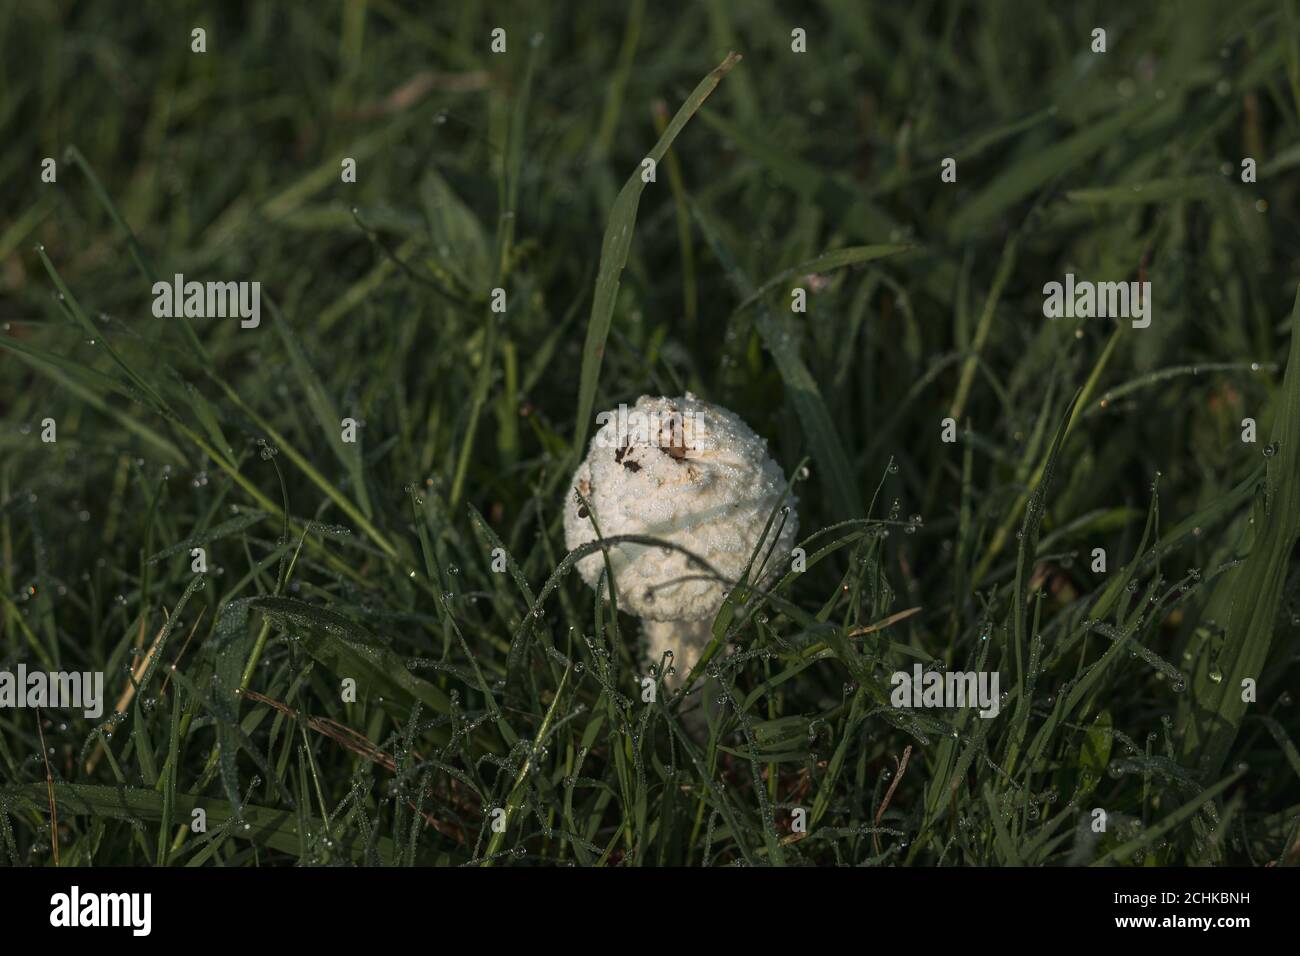 One small white isolated mushroom in grass Stock Photo